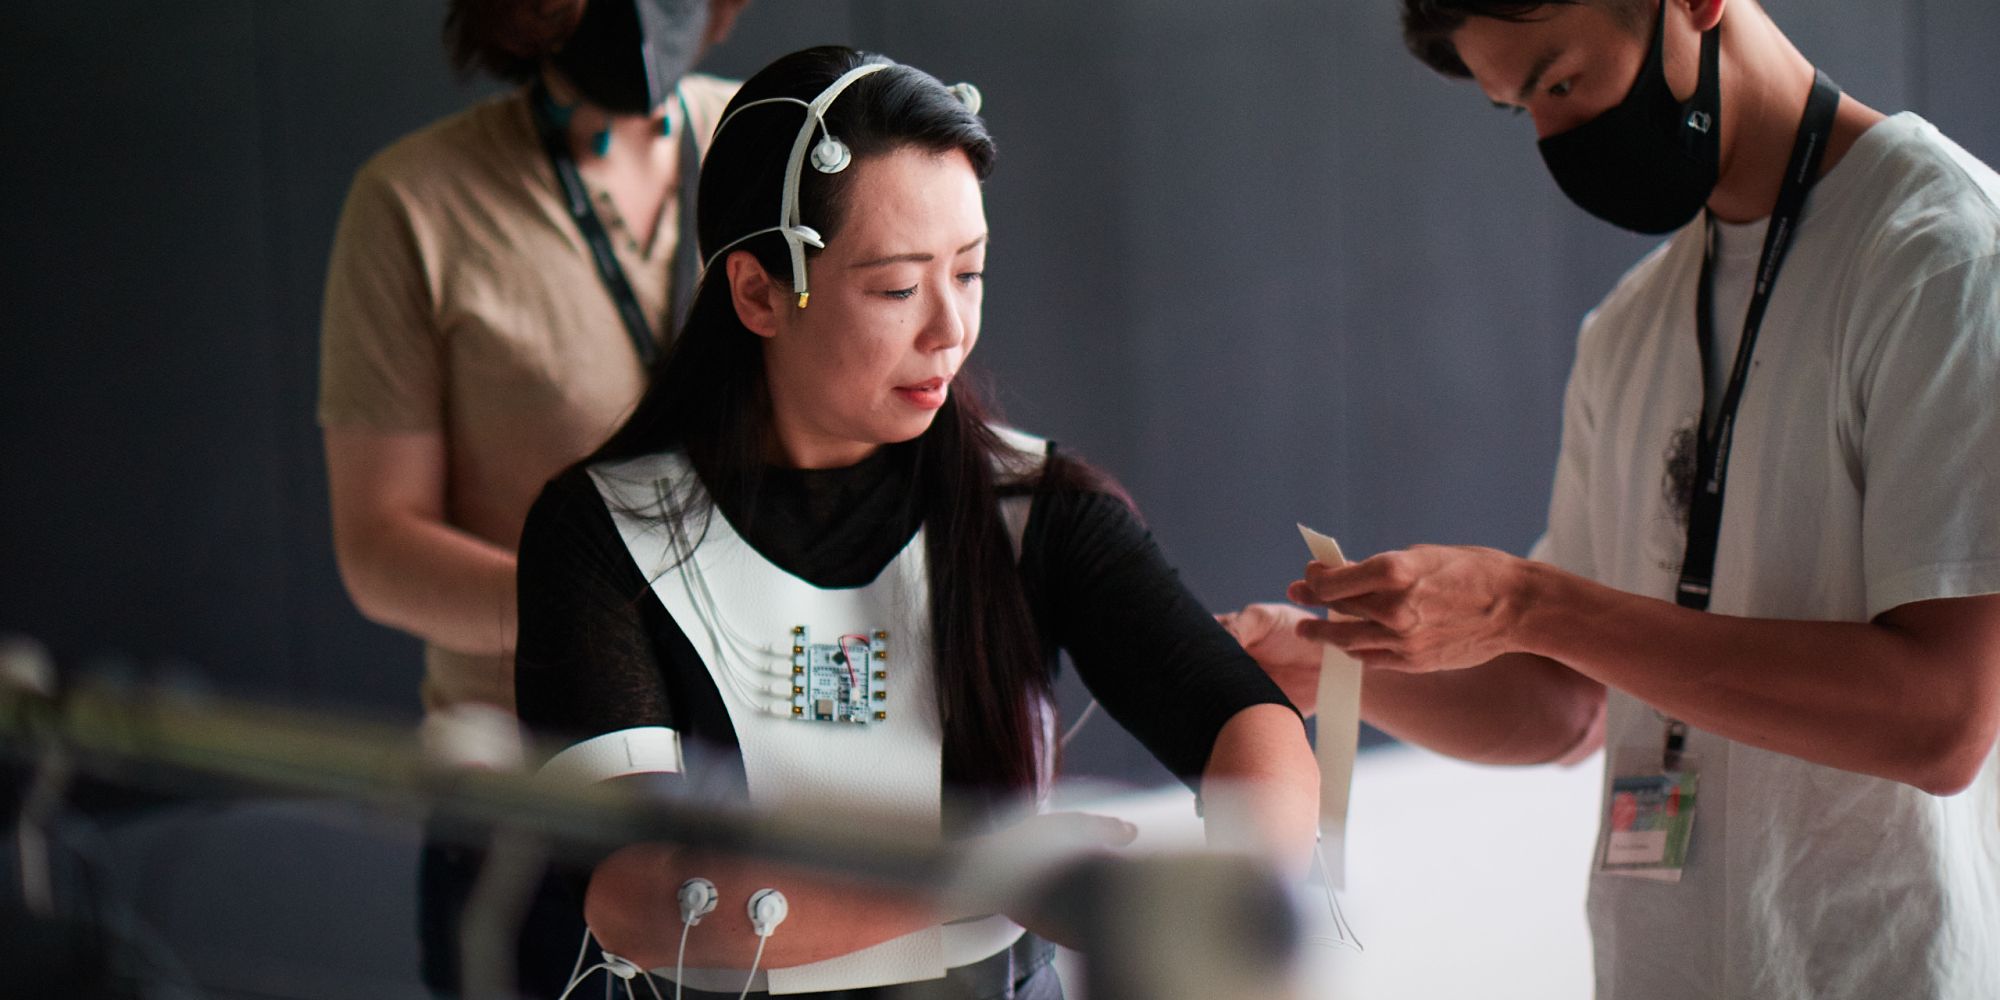 Life Ink is being set up for pianist Maki Namekawa at the Futurelab Day, Ars Electronica Festival 2022.